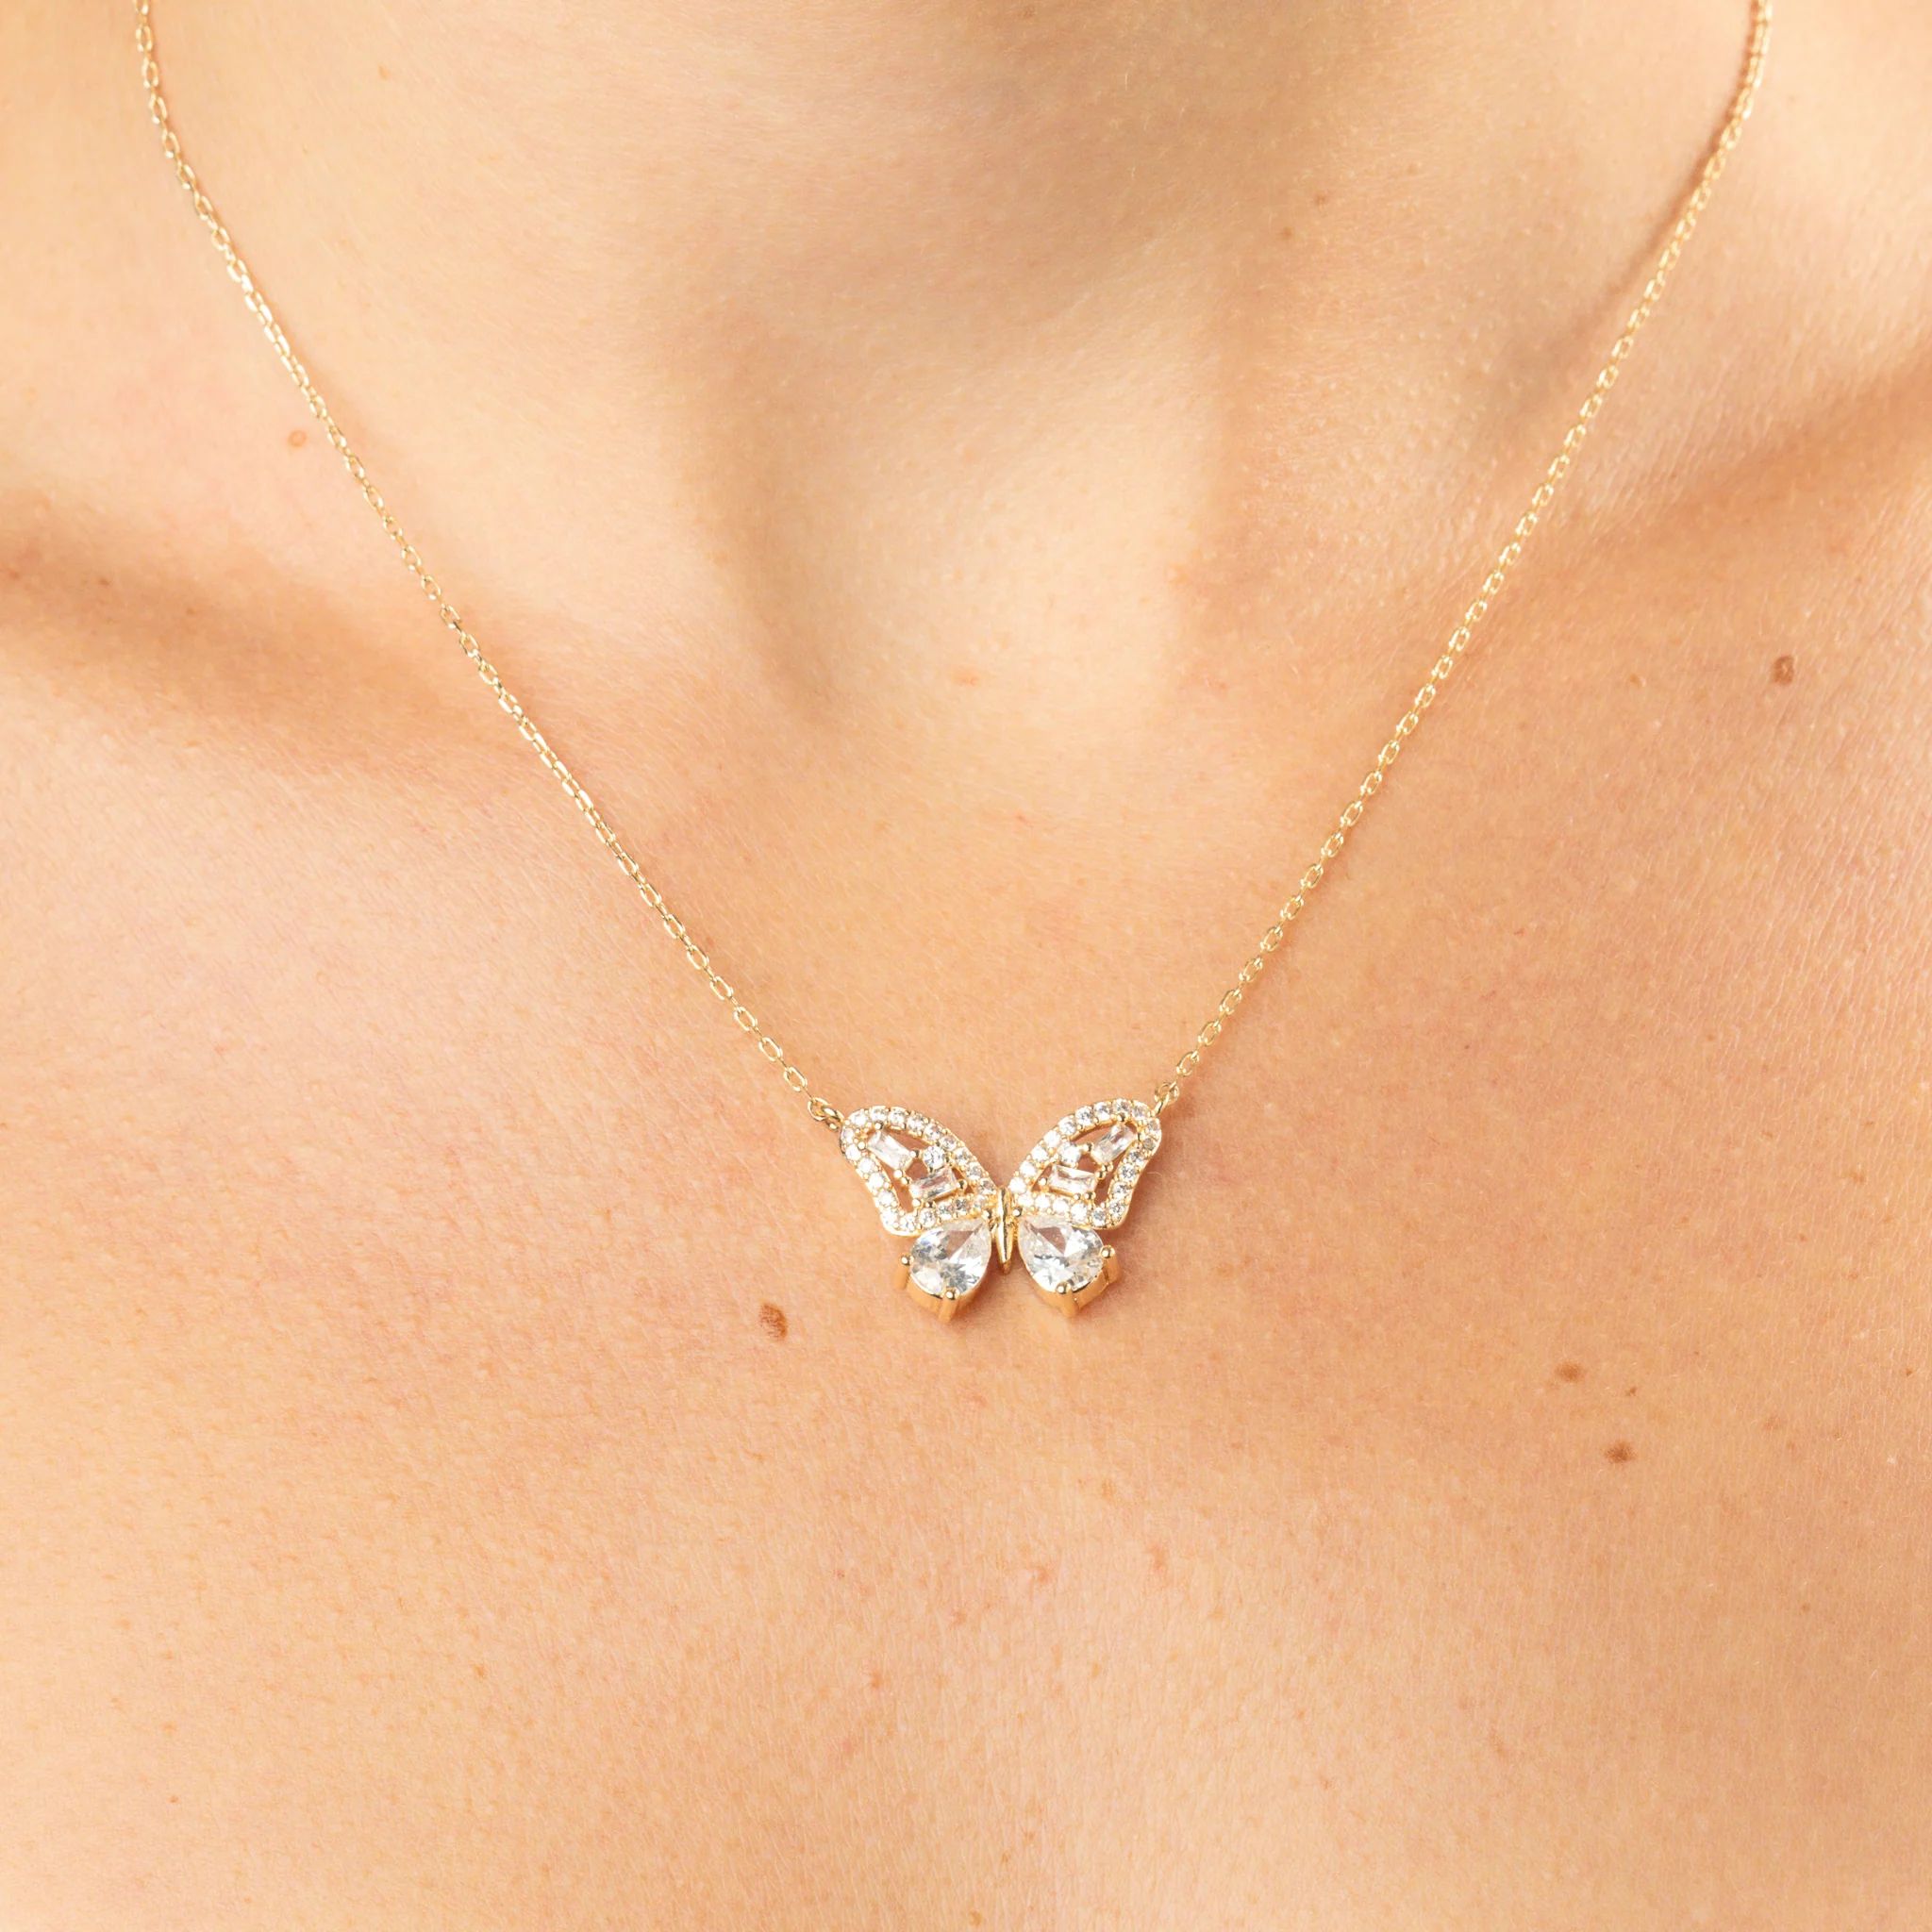 The Brilliant Butterfly Necklace | Jaclyn Roxanne